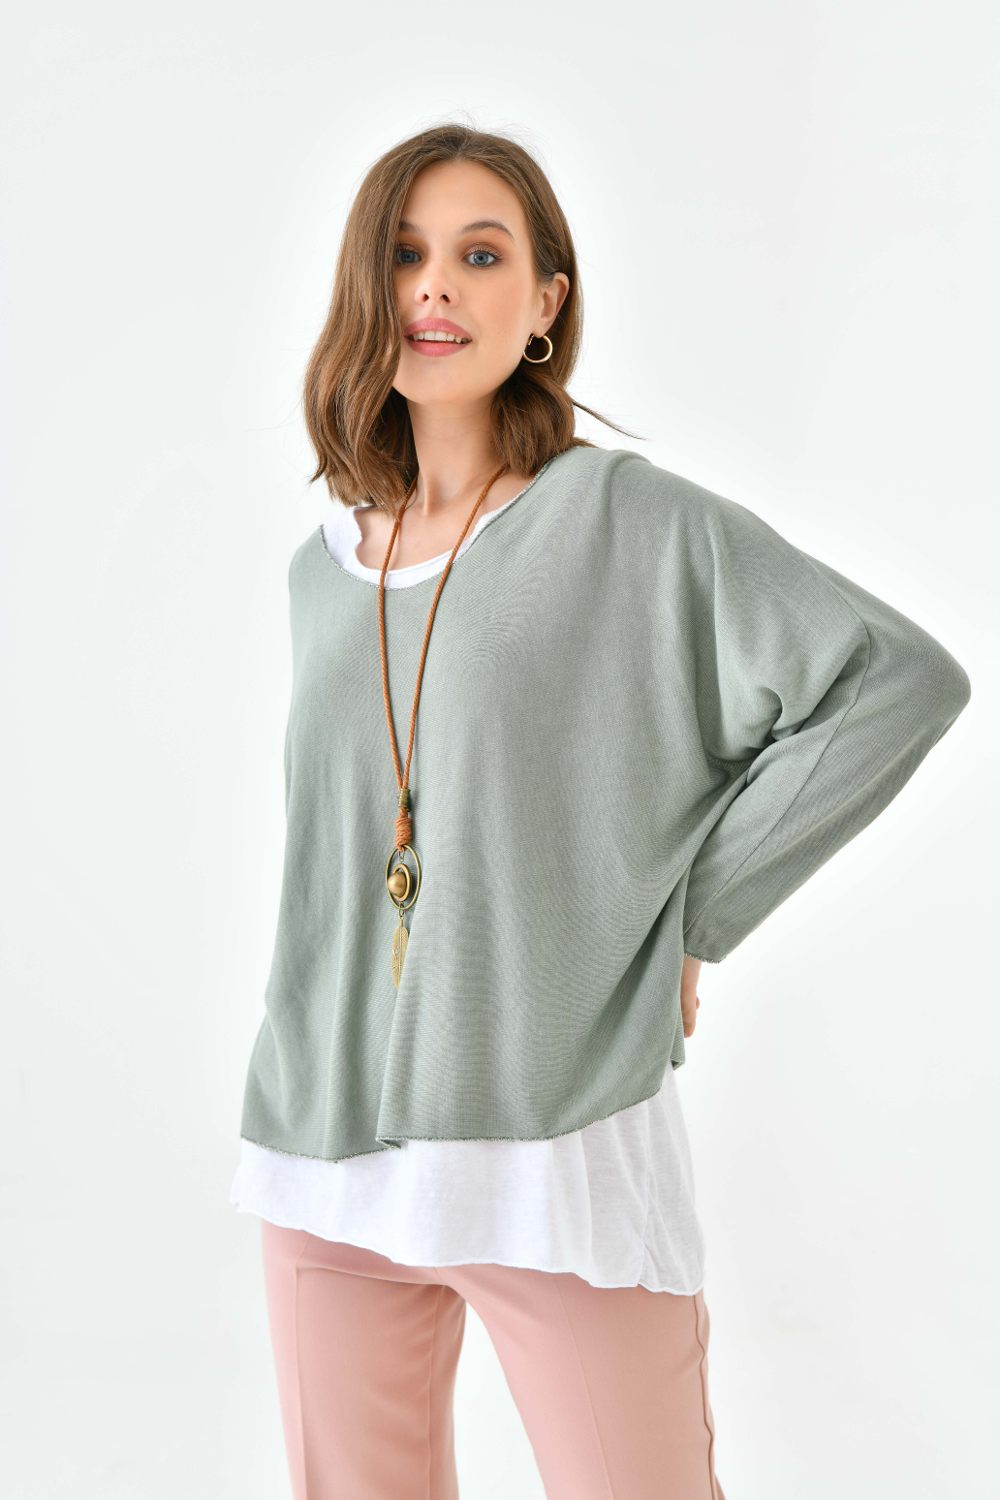 Oversized Long Sleeve Layered Blouse With Necklace In Green And White 0172BLOUSEGREENNECKLACE